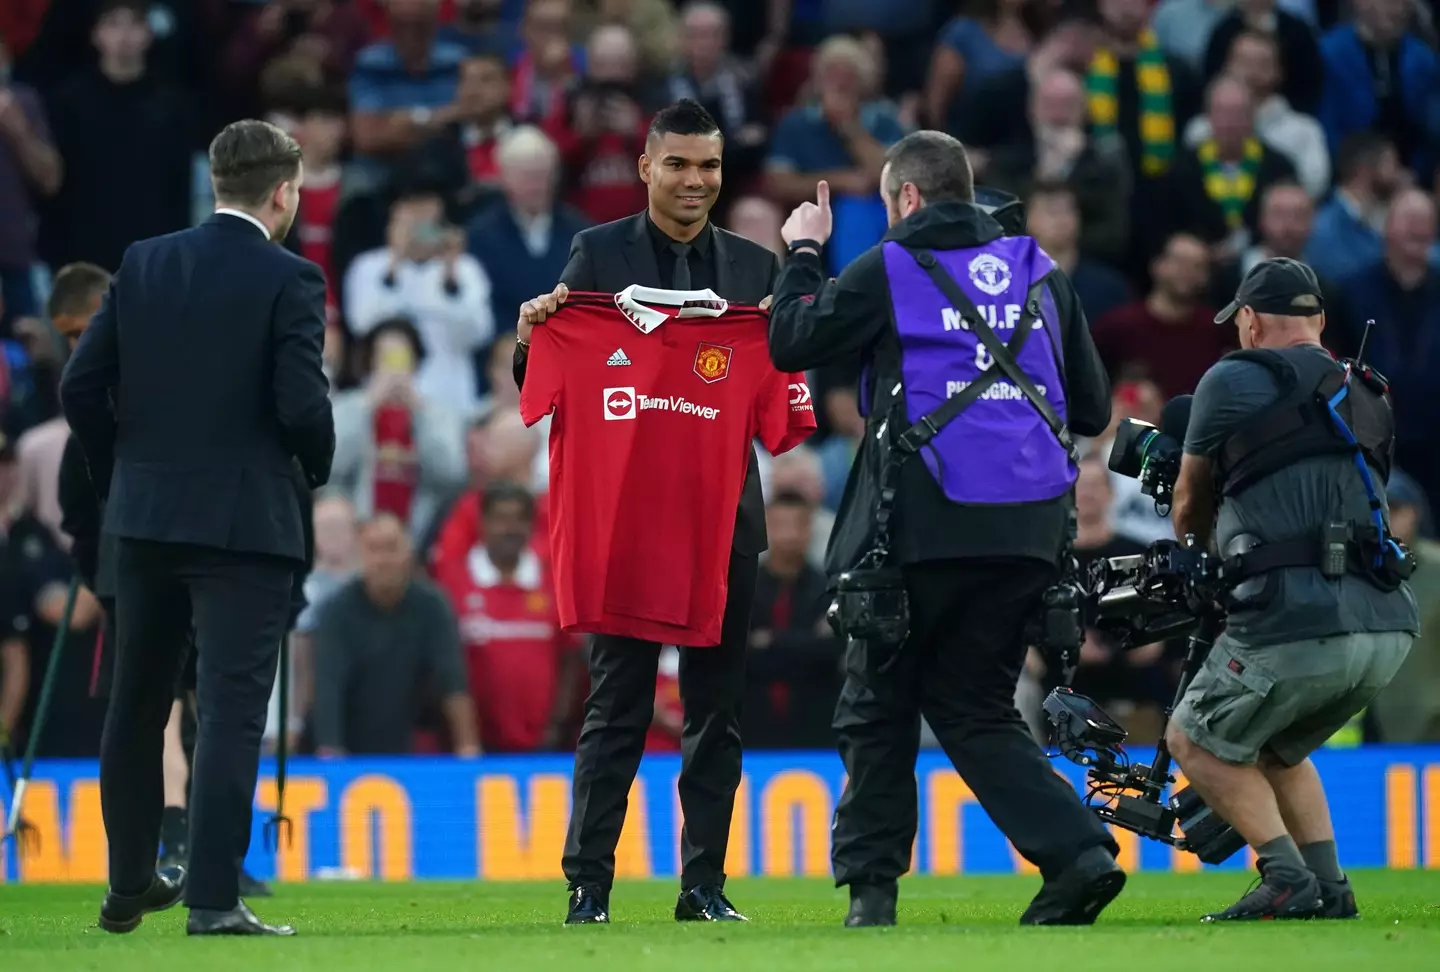 Casemiro welcomed to United during anti Glazer protests at the win over Liverpool. Image: Alamy